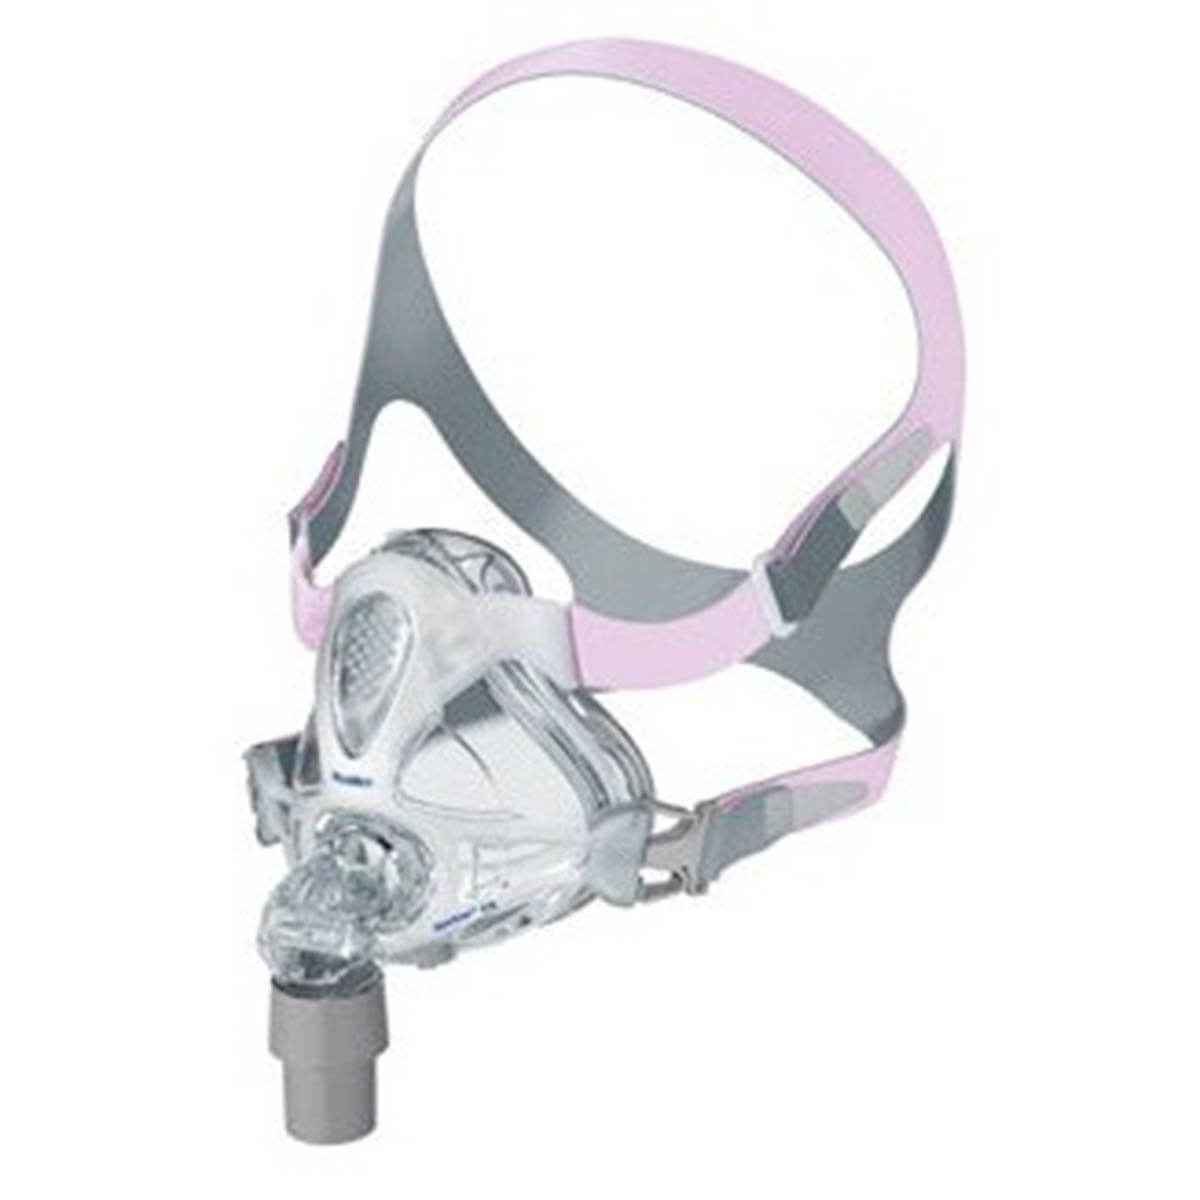 ResMed Quattro FX for Her Full Face CPAP Mask